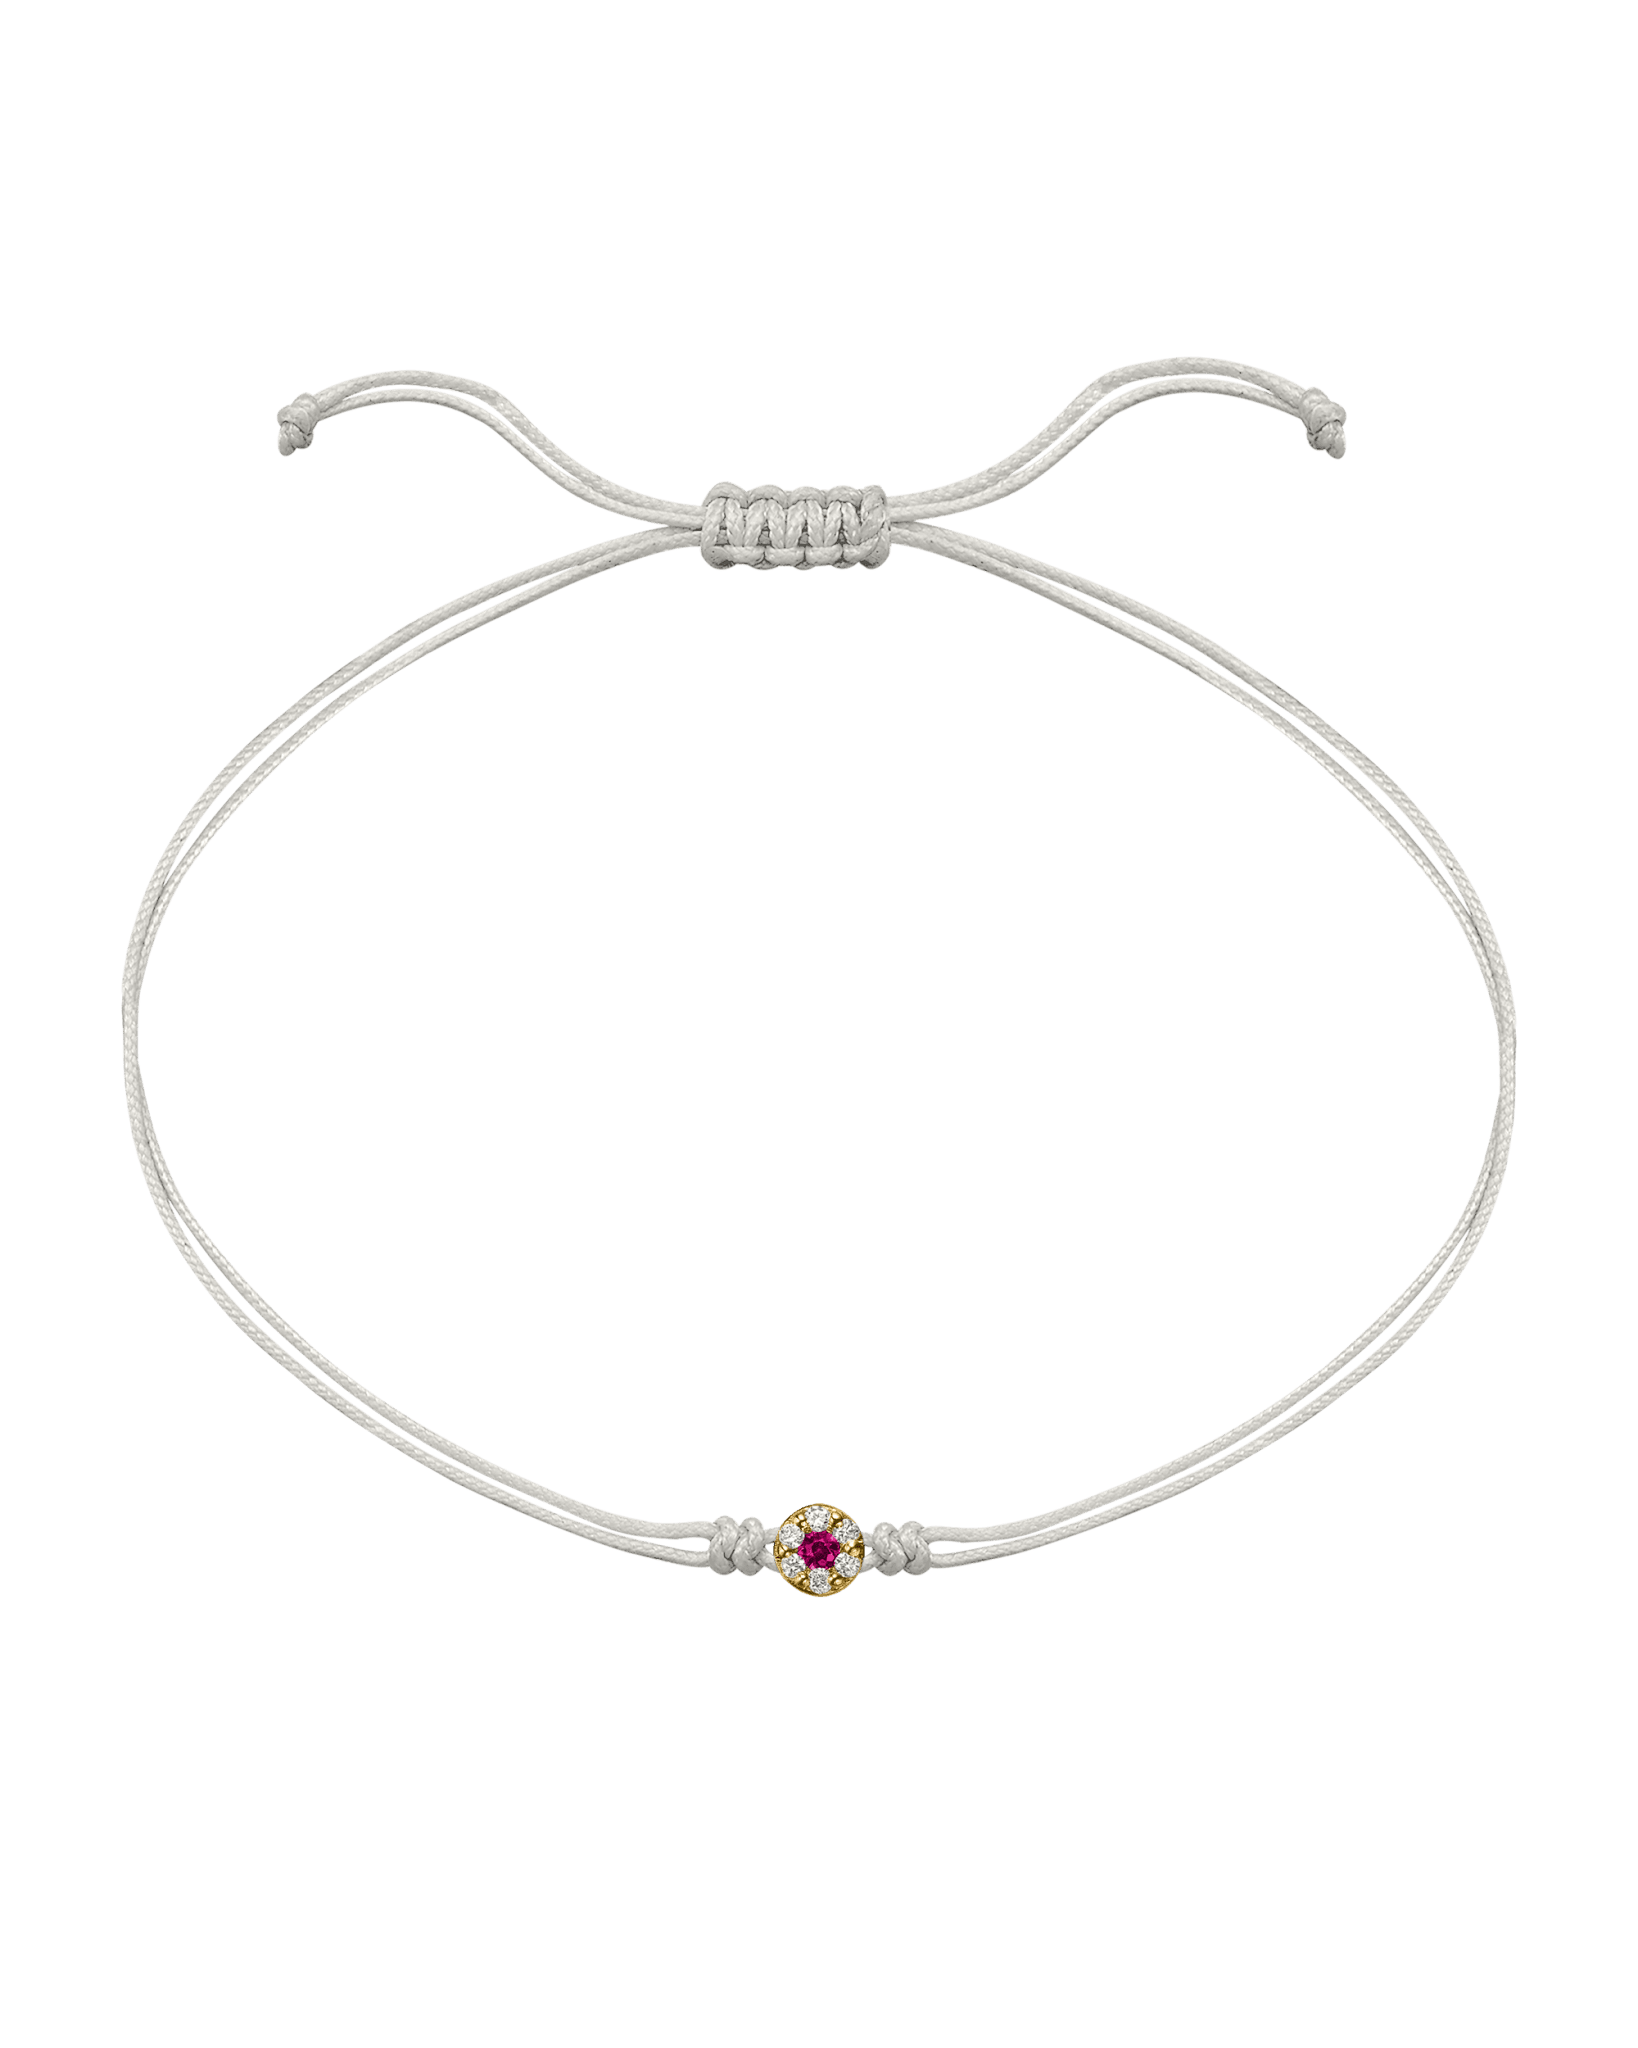 String of Love Diamond and Gemstone - 14K Yellow Gold Bracelet 14K Solid Gold Pearl Ruby 